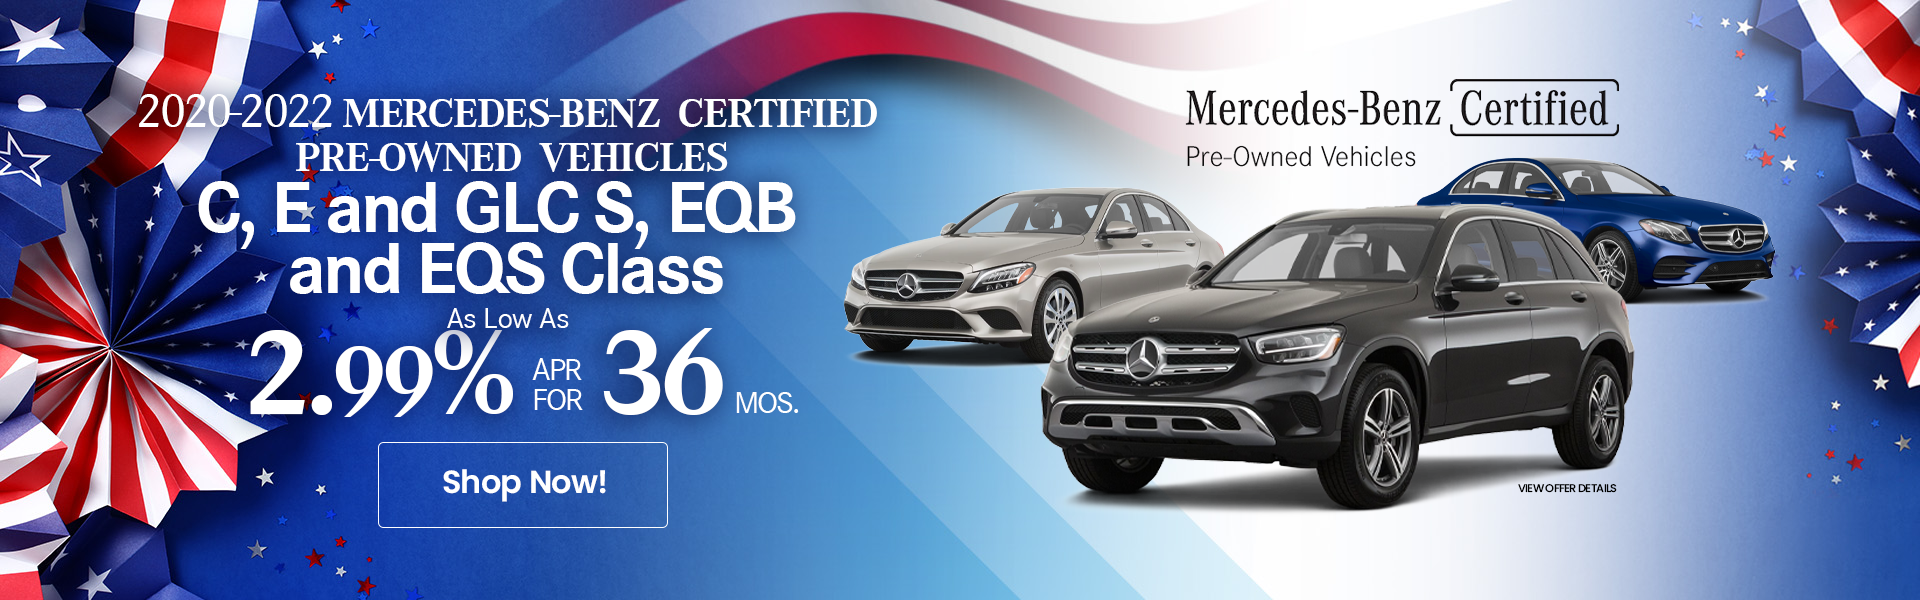 Mercedes Pre-Owned